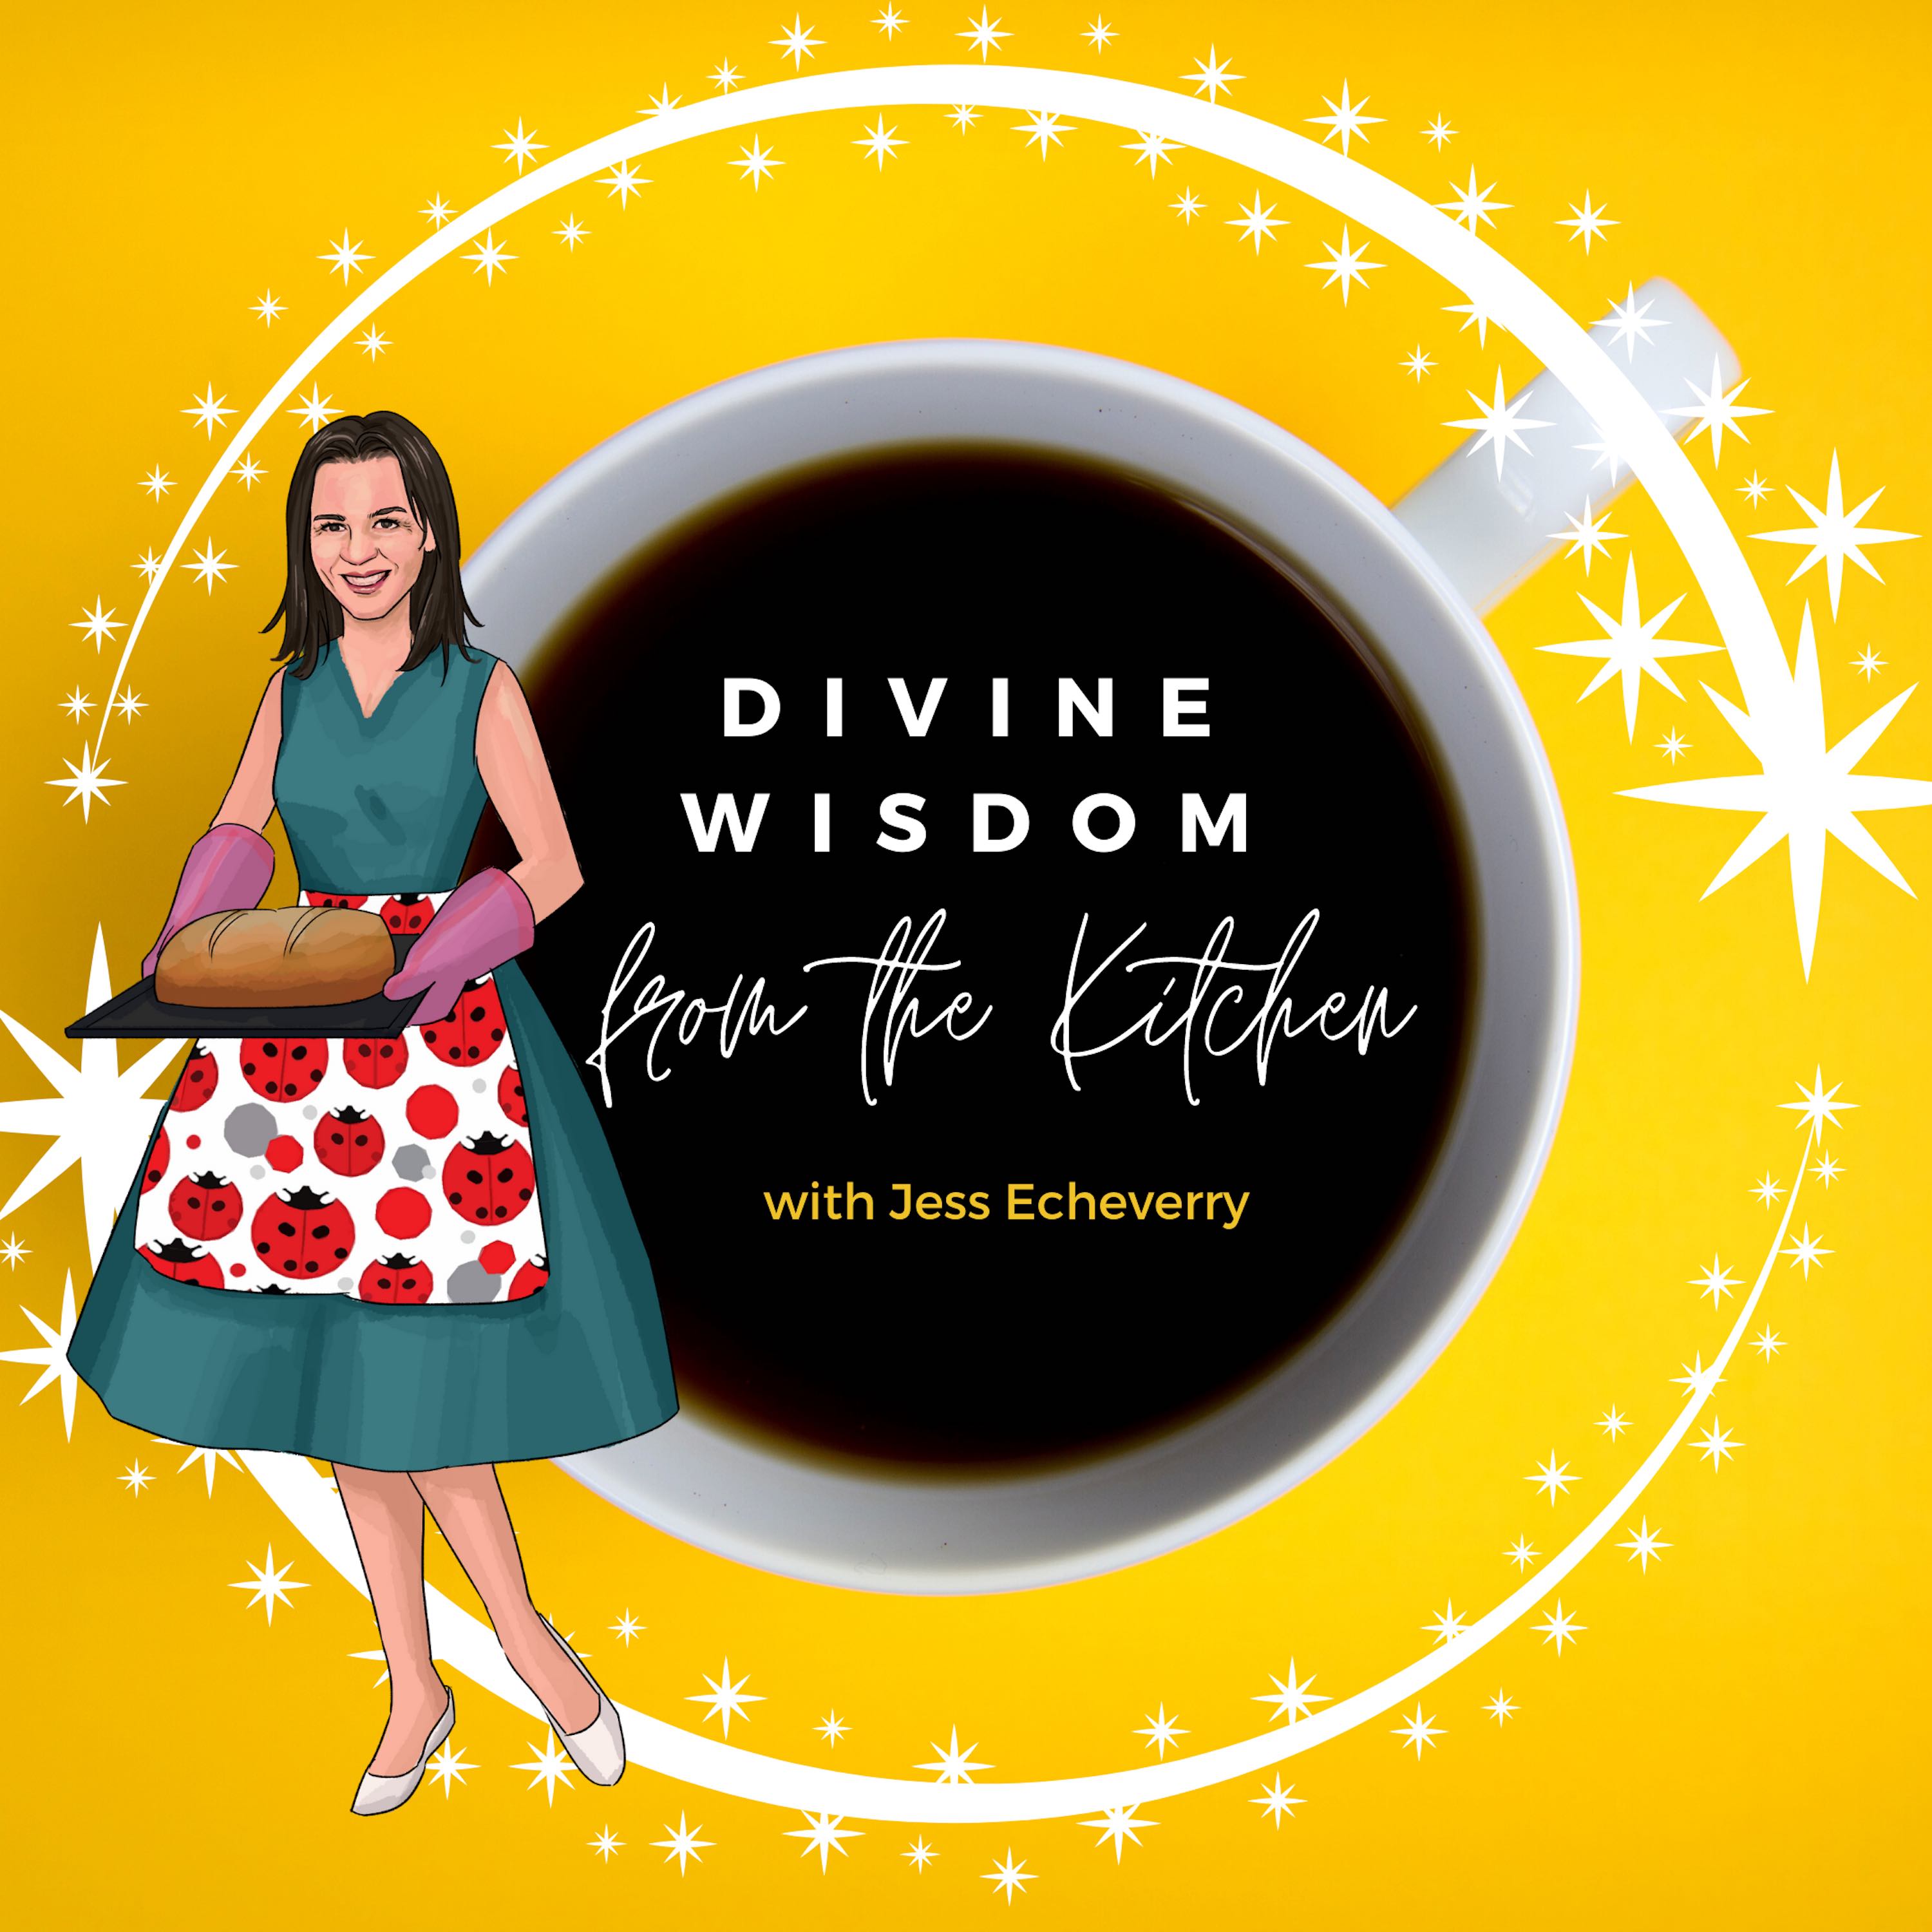 Artwork for podcast Divine Wisdom from the Kitchen